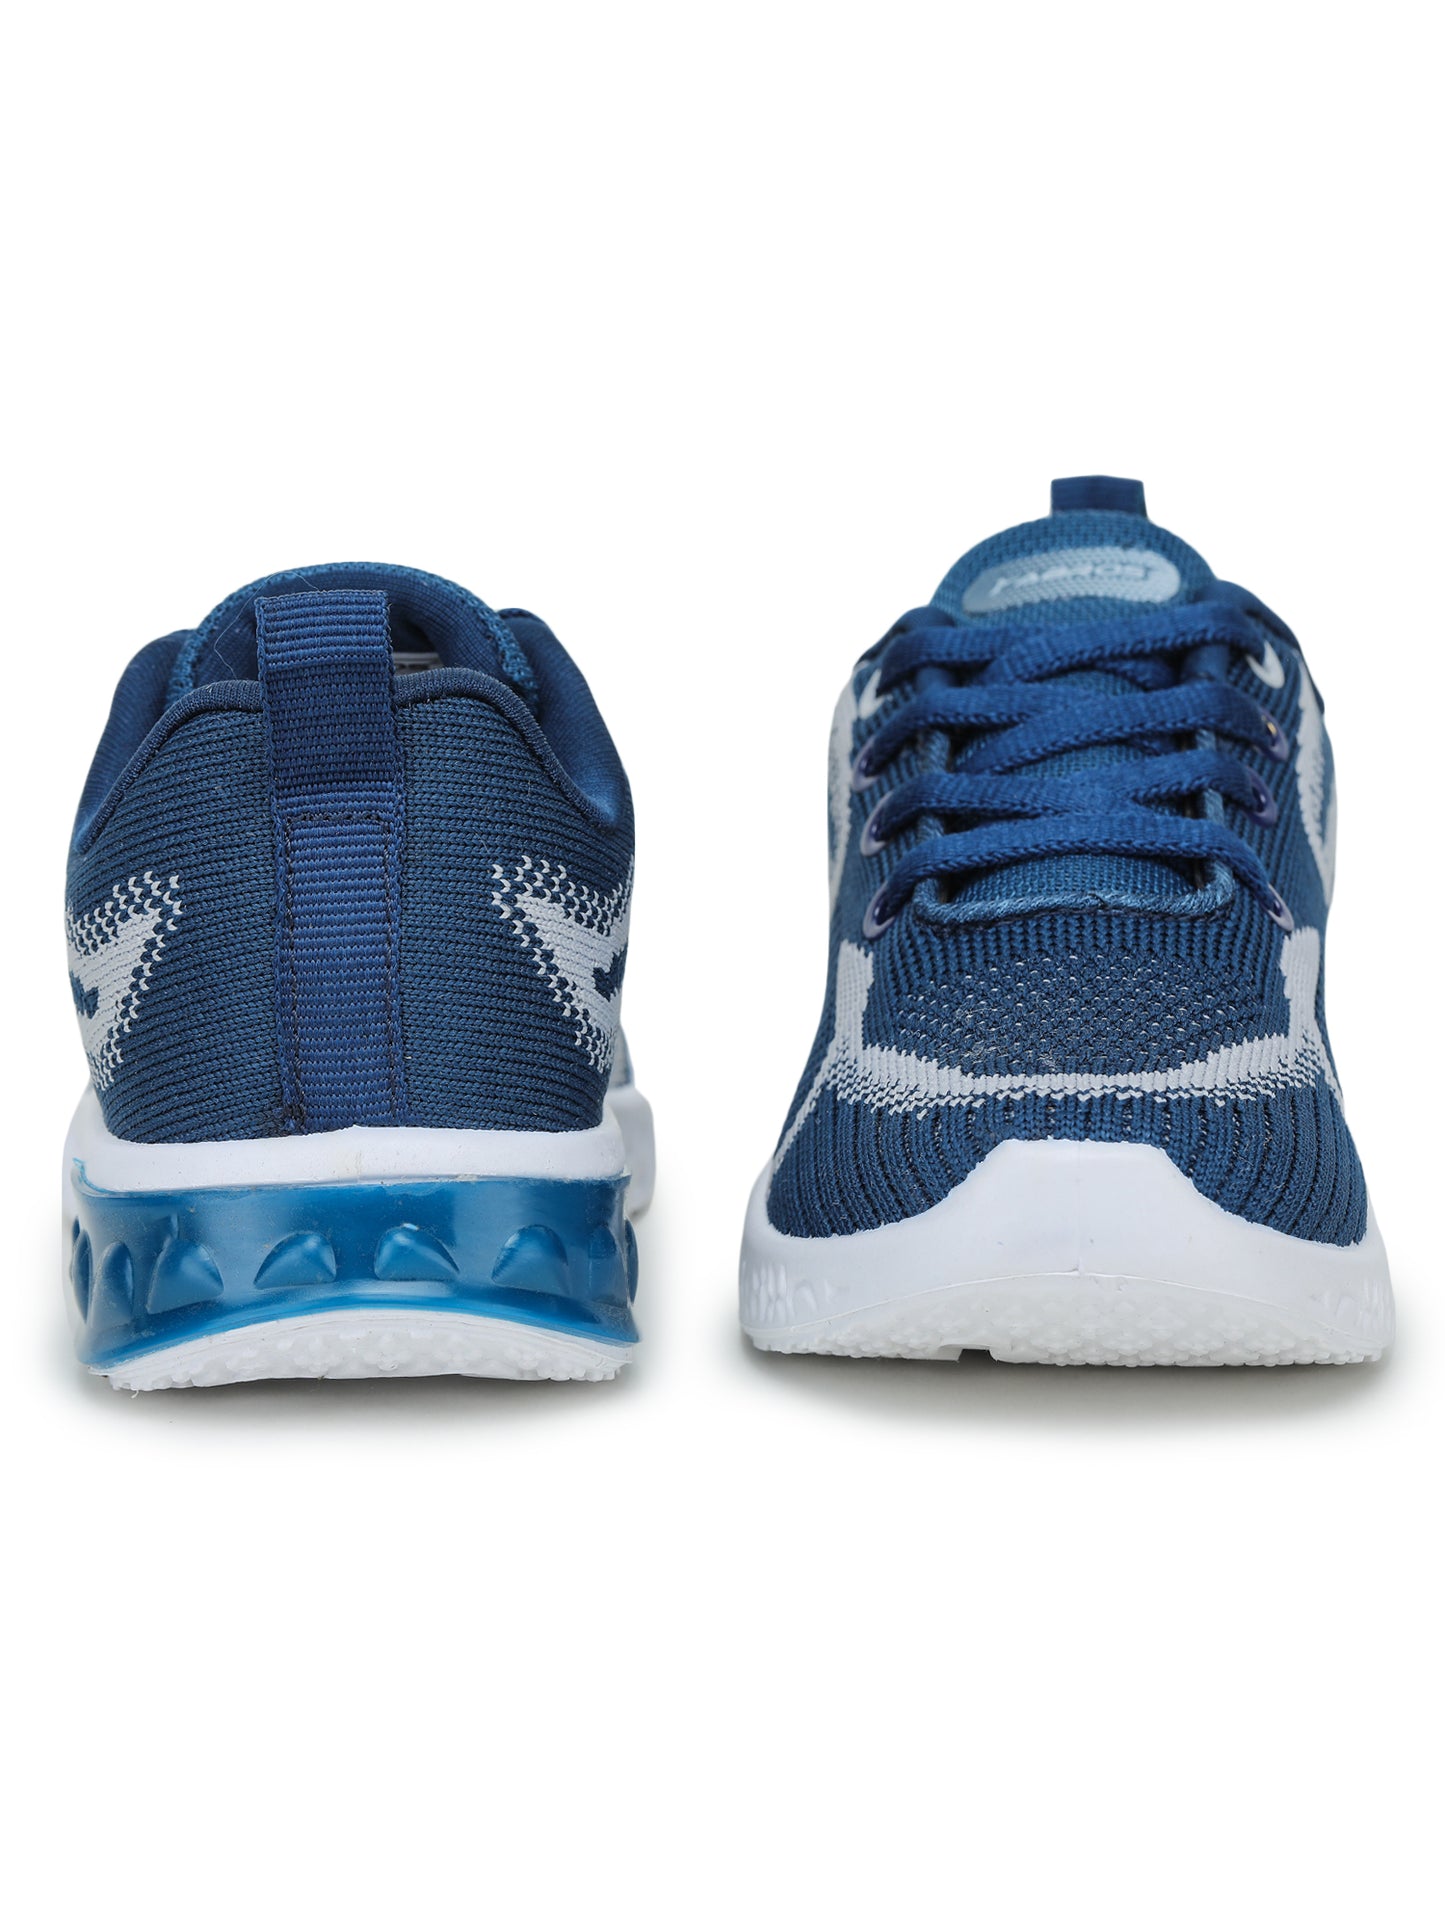 ABROS ROCK SPORTS SHOES FOR KIDS